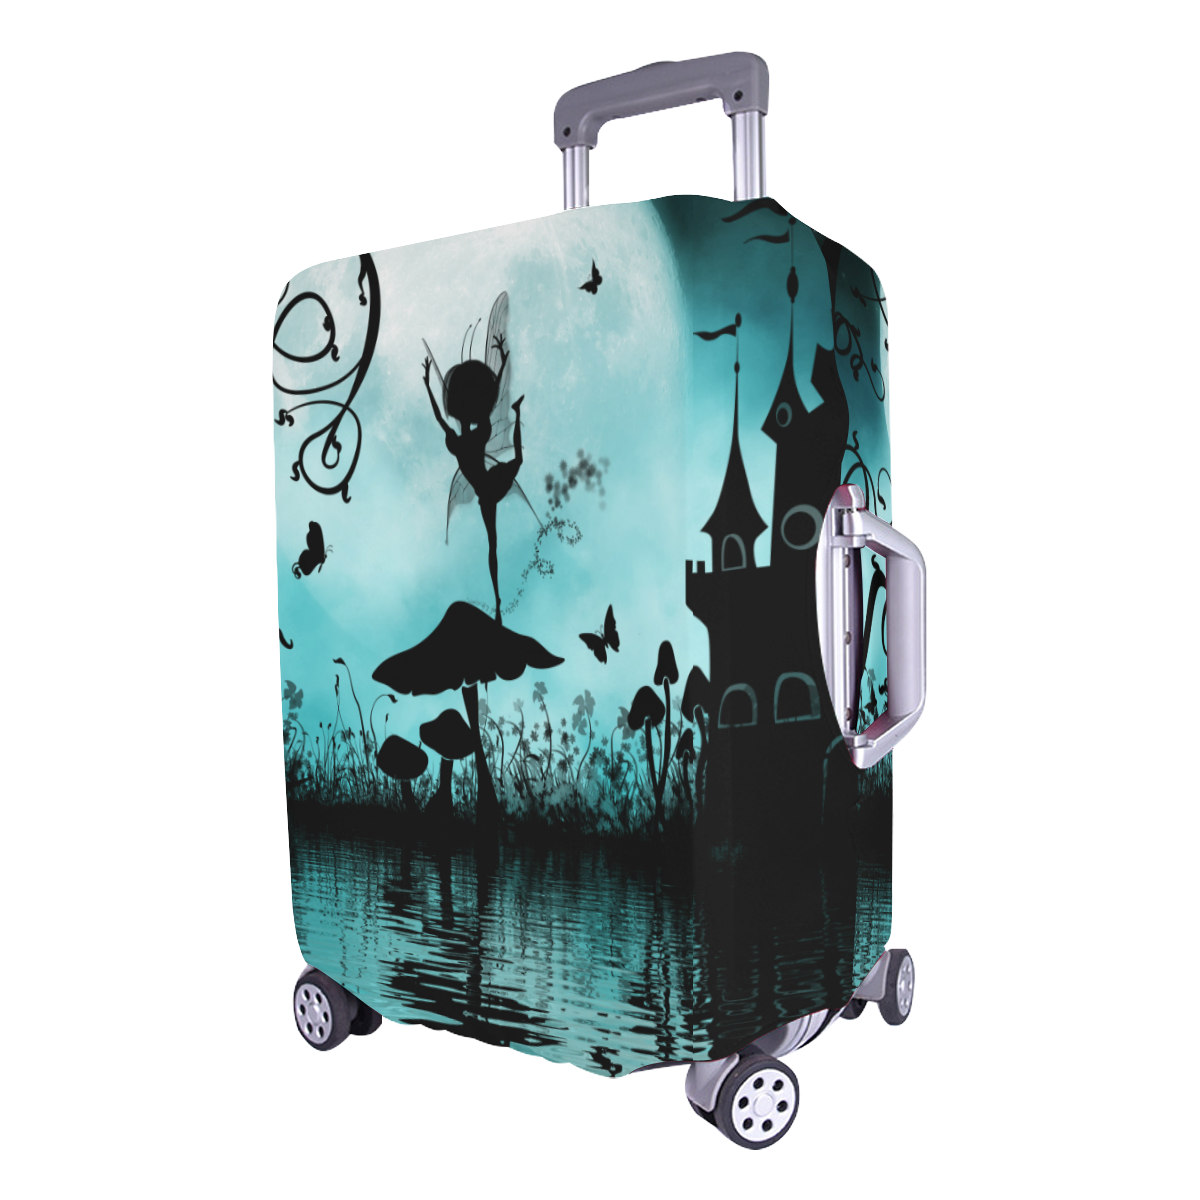 Dancing in the night Luggage Cover/Large 26"-28"